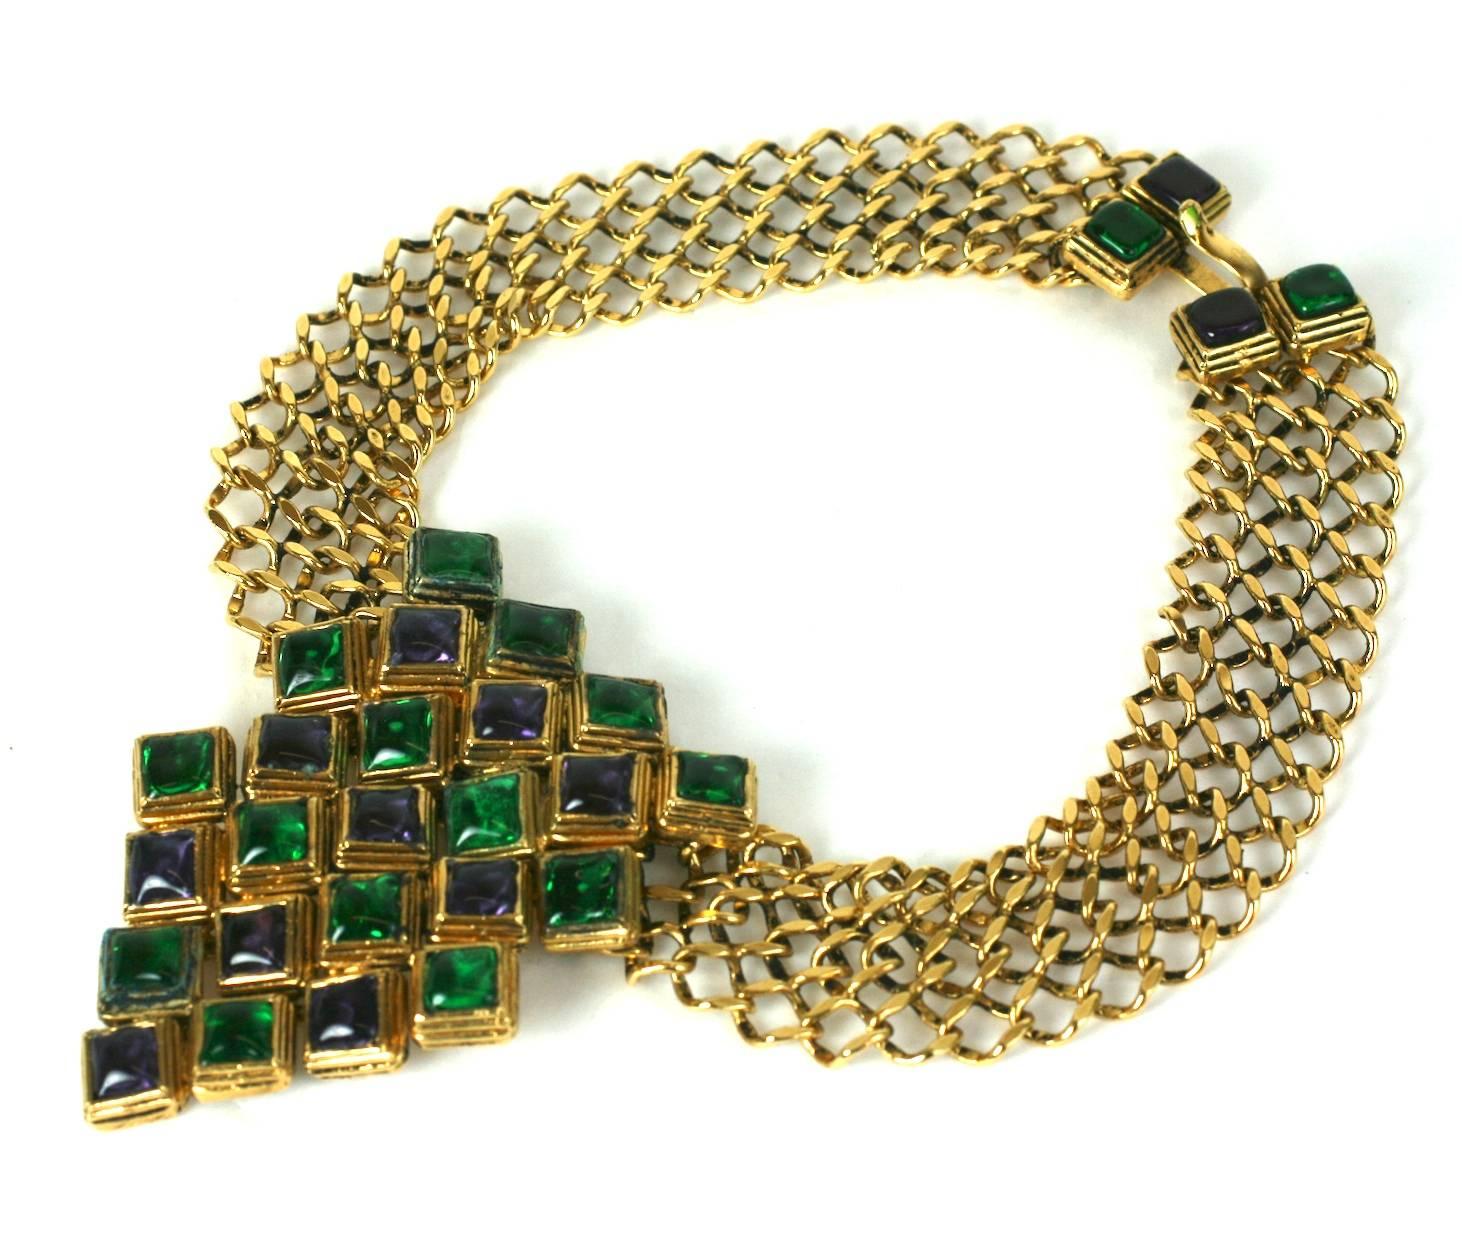 Maison Gripoix Collar, for Loewe runway. A large articulated centerpiece in emerald and amythest poured glass is attached to a wide chain link collar. Elaborate workmanship with original glass hook clasp. 1980's France.
Unsigned runway sample,